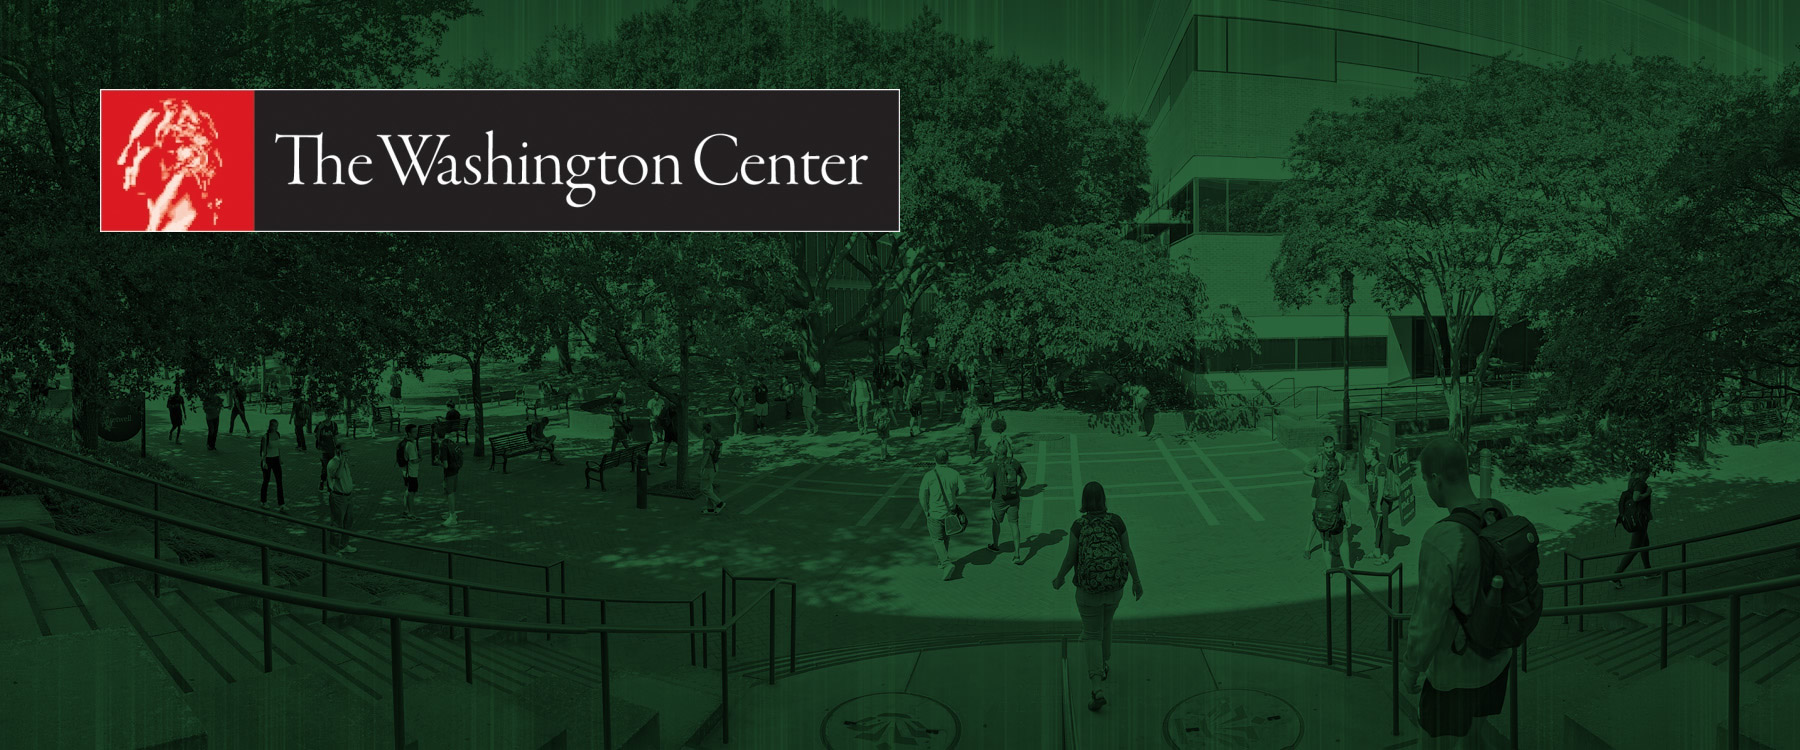 UNC Charlotte partnering with The Washington Center for RNC student learning experience